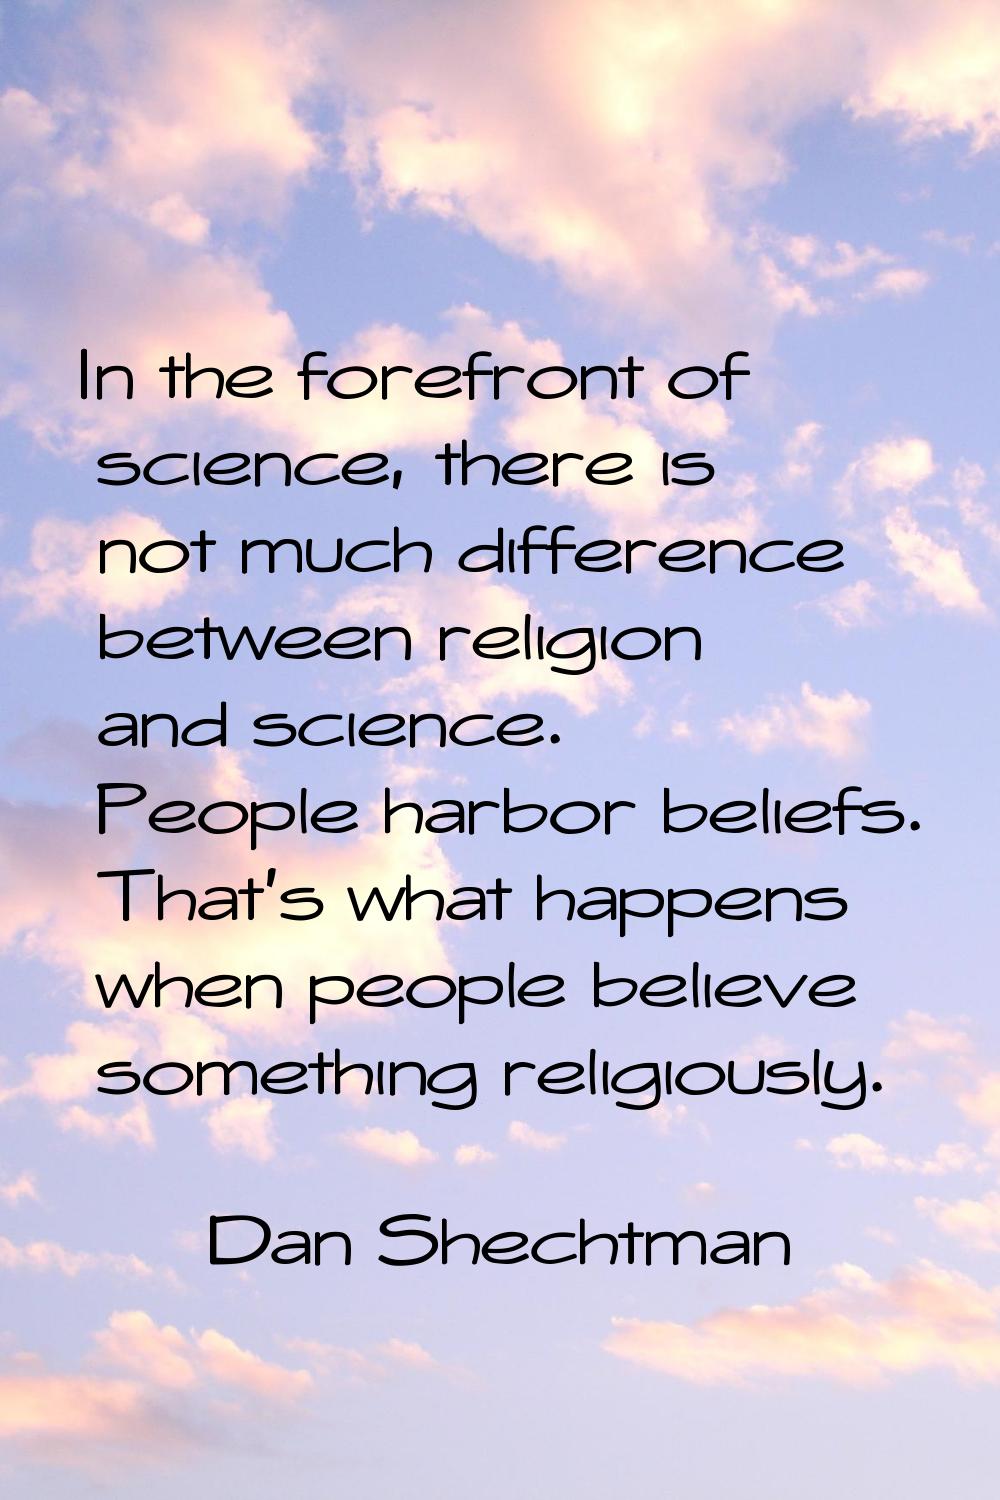 In the forefront of science, there is not much difference between religion and science. People harb